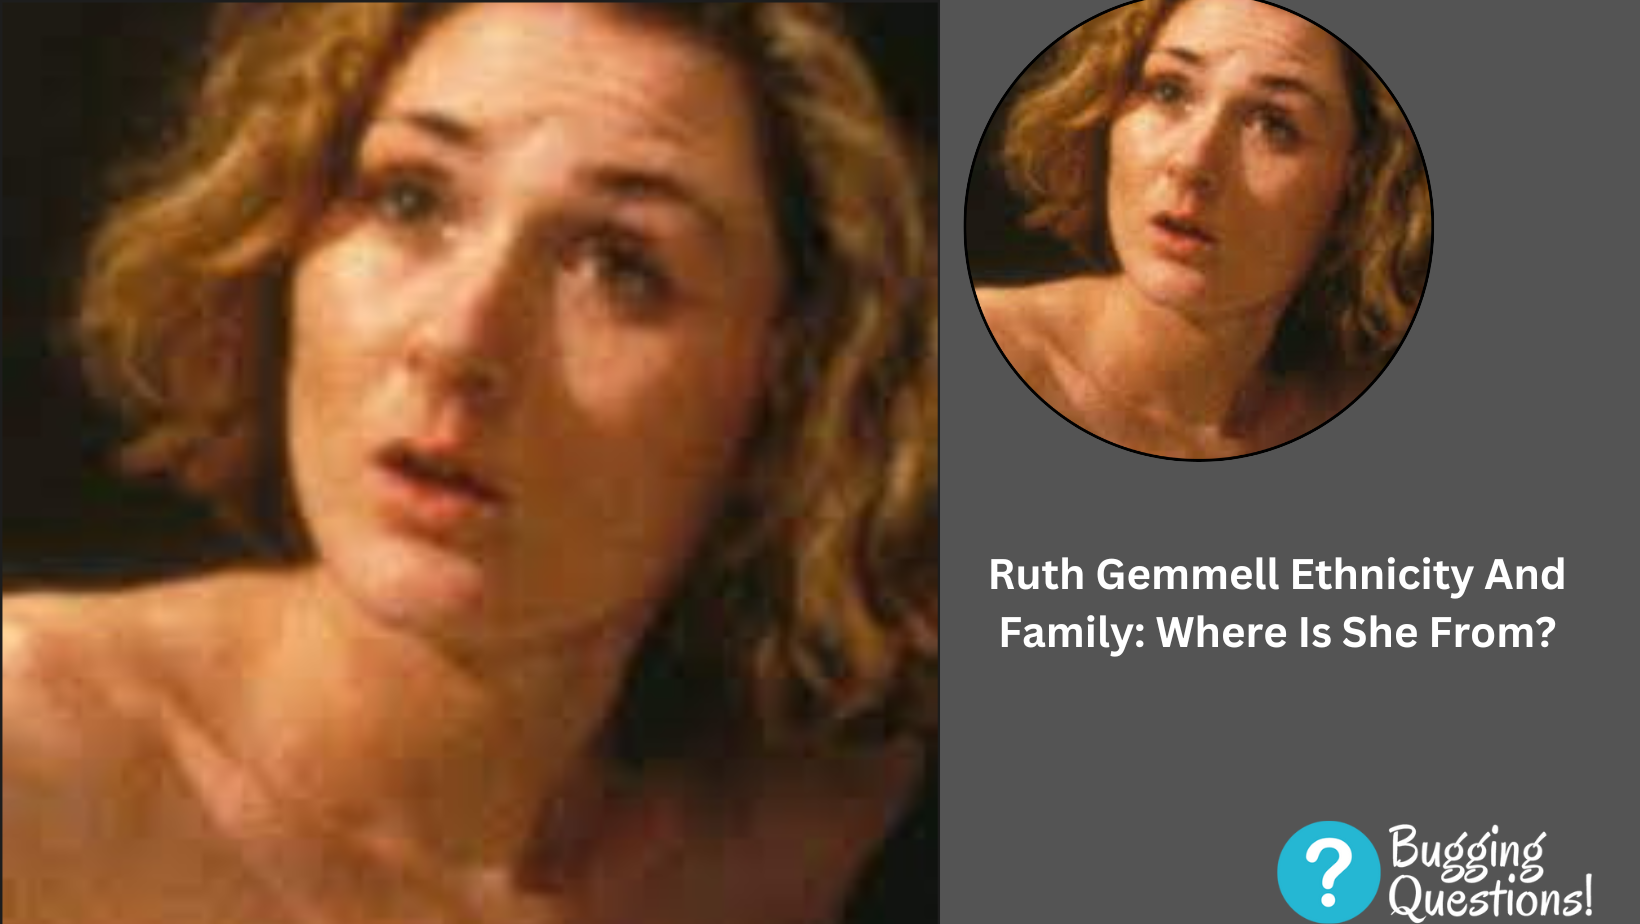 Ruth Gemmell Ethnicity And Family: Where Is She From?